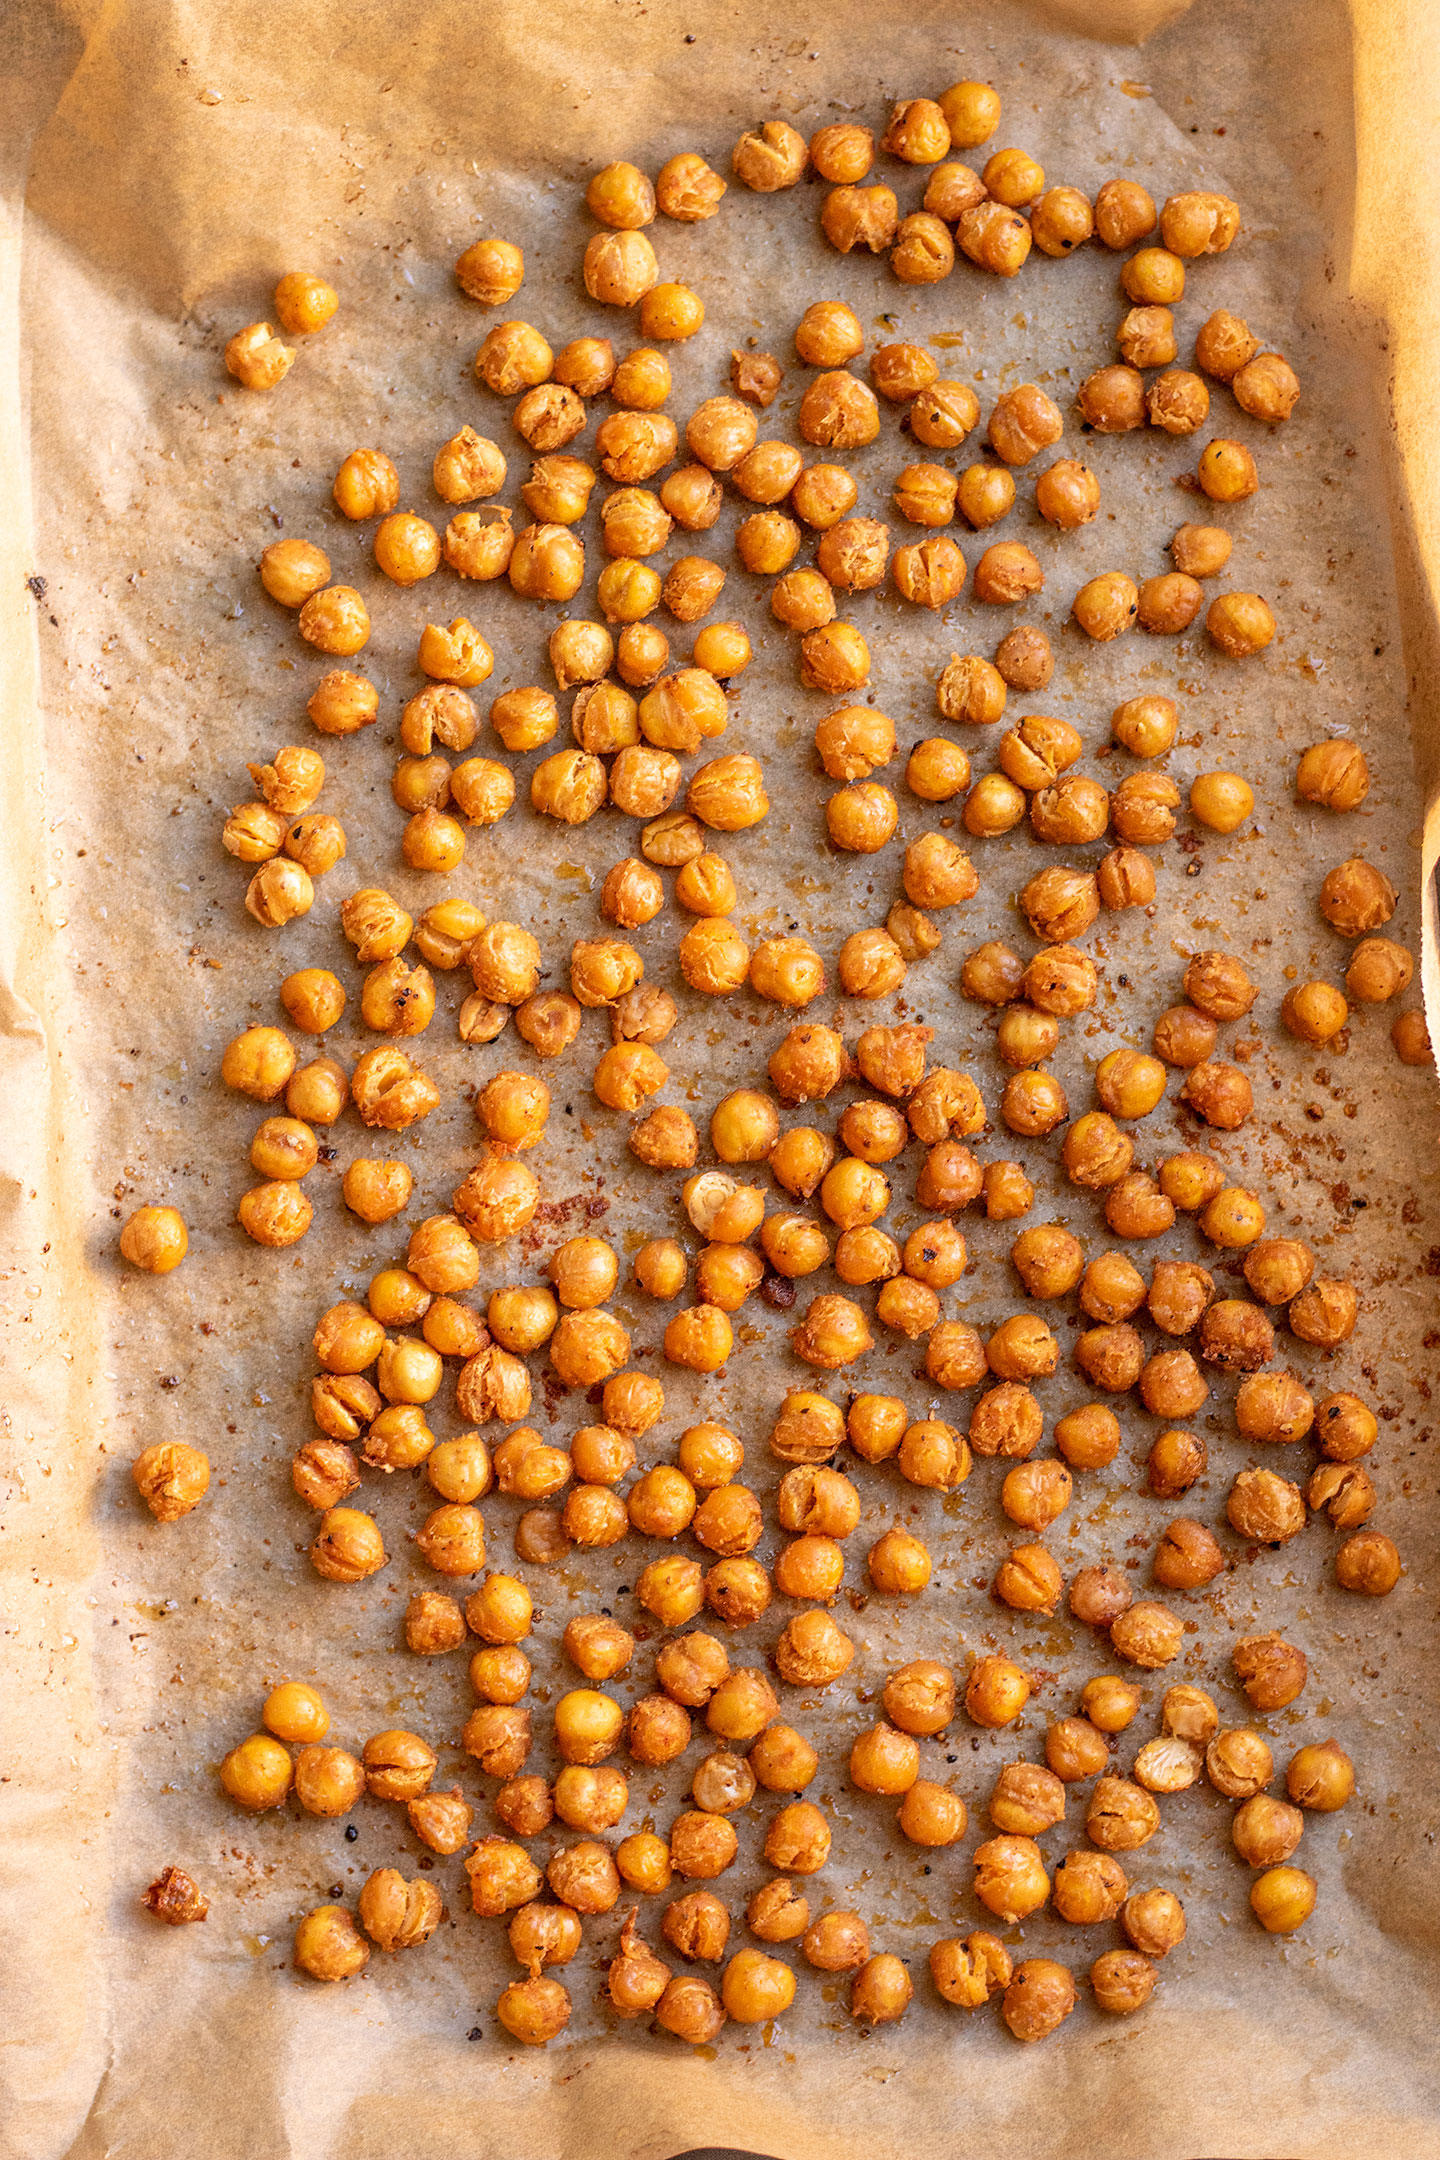 Crispy chickpeas after roasting in the oven on a parchment lined sheet pan.